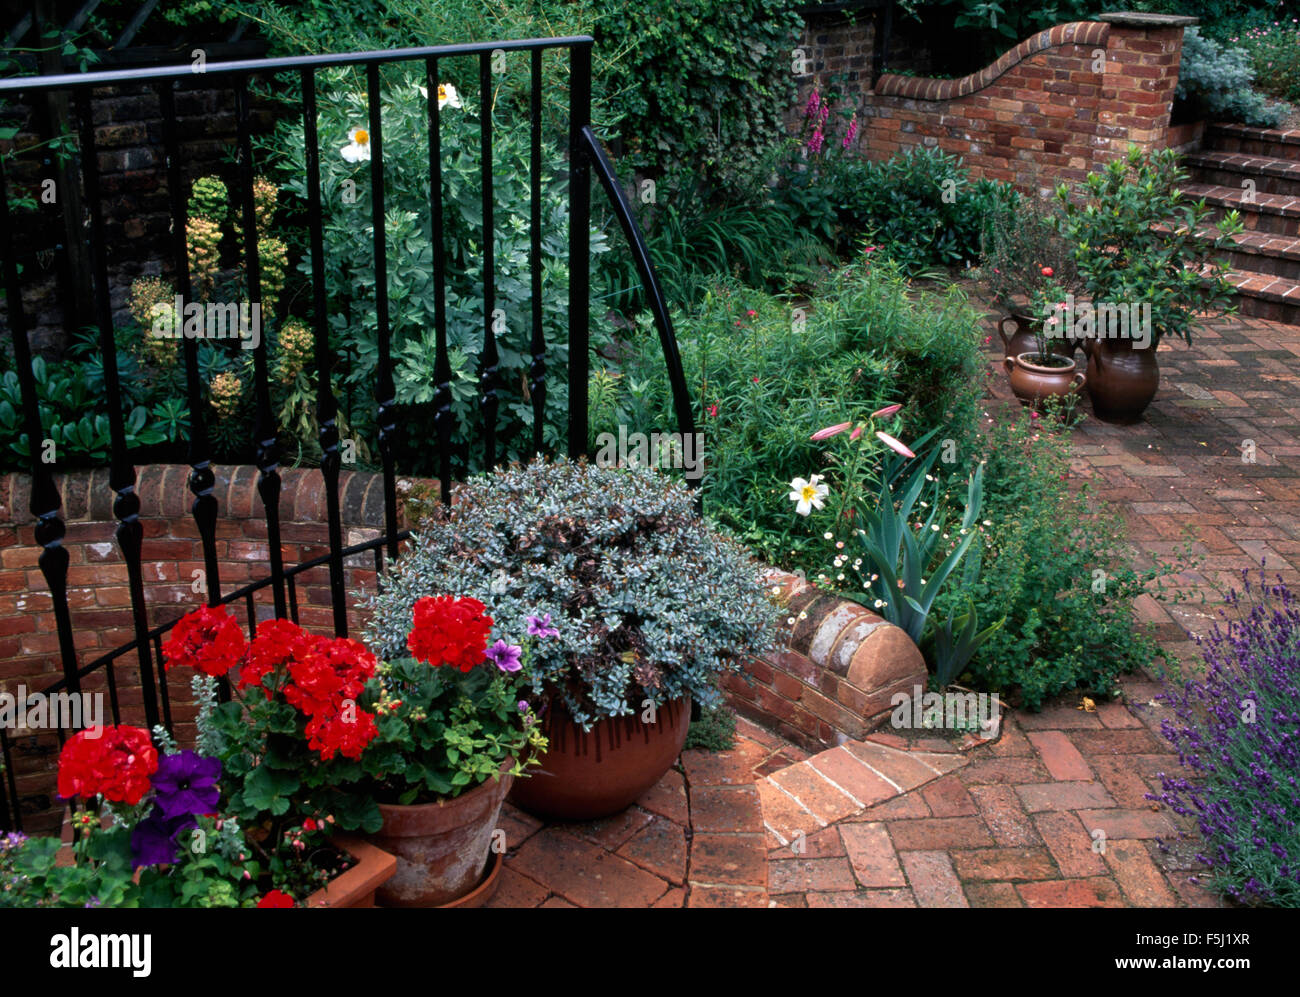 Red geraniums and a small hebe in terracotta pots against iron railings on brick paving in a town garden Stock Photo